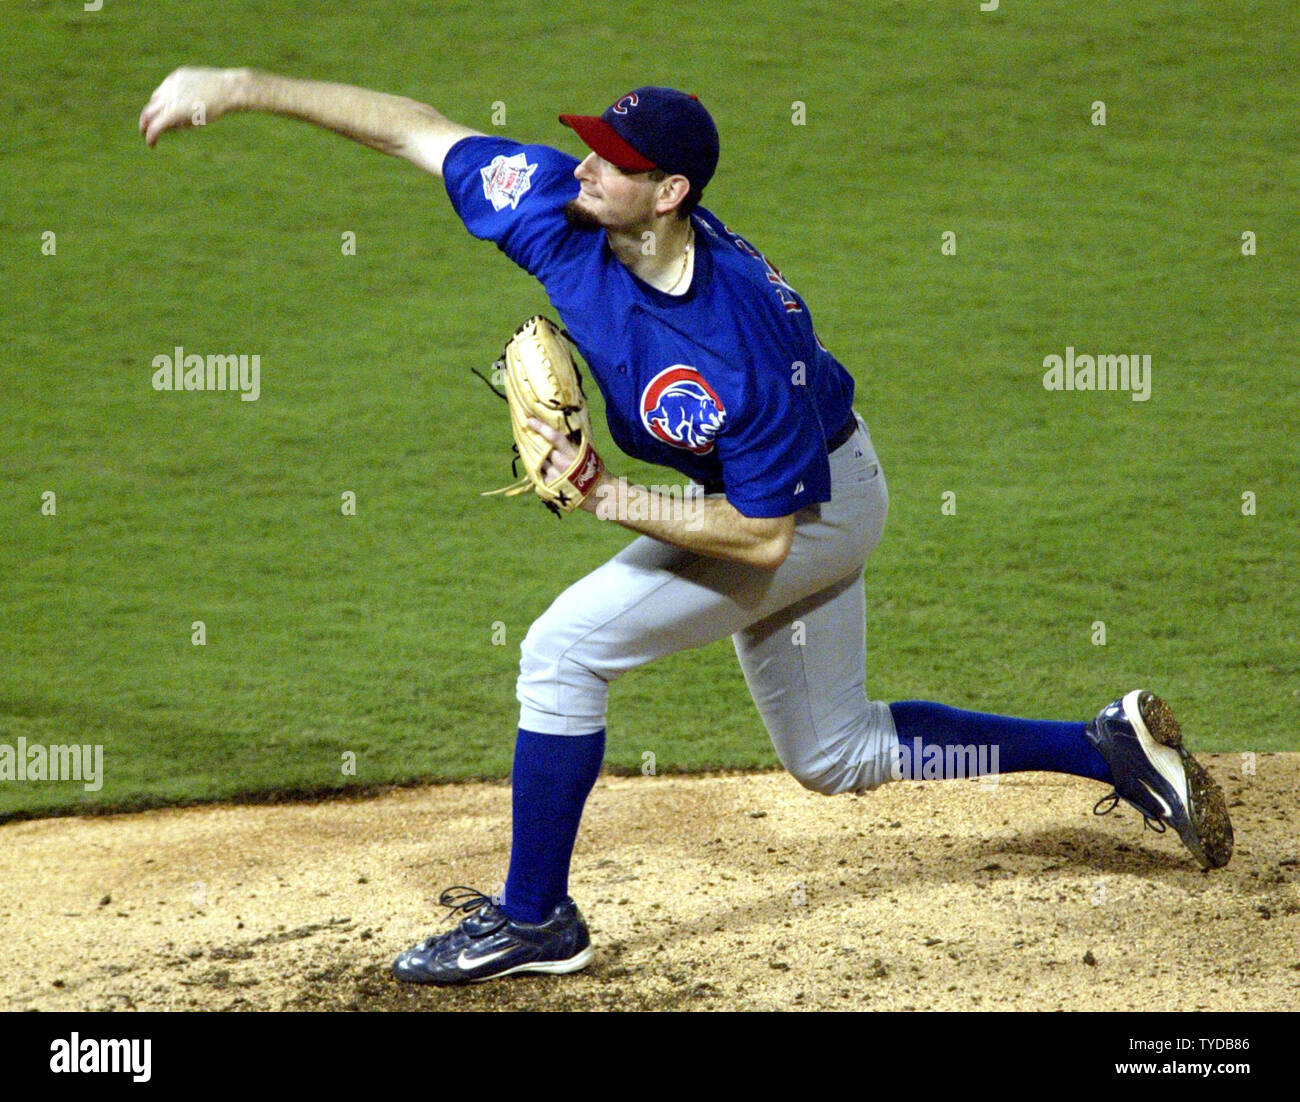 Chicago Cubs Matt Clement works against the Florida Marlins in game 4 of the NLCS, at Pro Player Stadium, Miami, Florida, October 11, 2003. The Cubs now lead the series 3-1 with this 8-2 victory over the Marlins.   (UPI/Michael Bush) Stock Photo